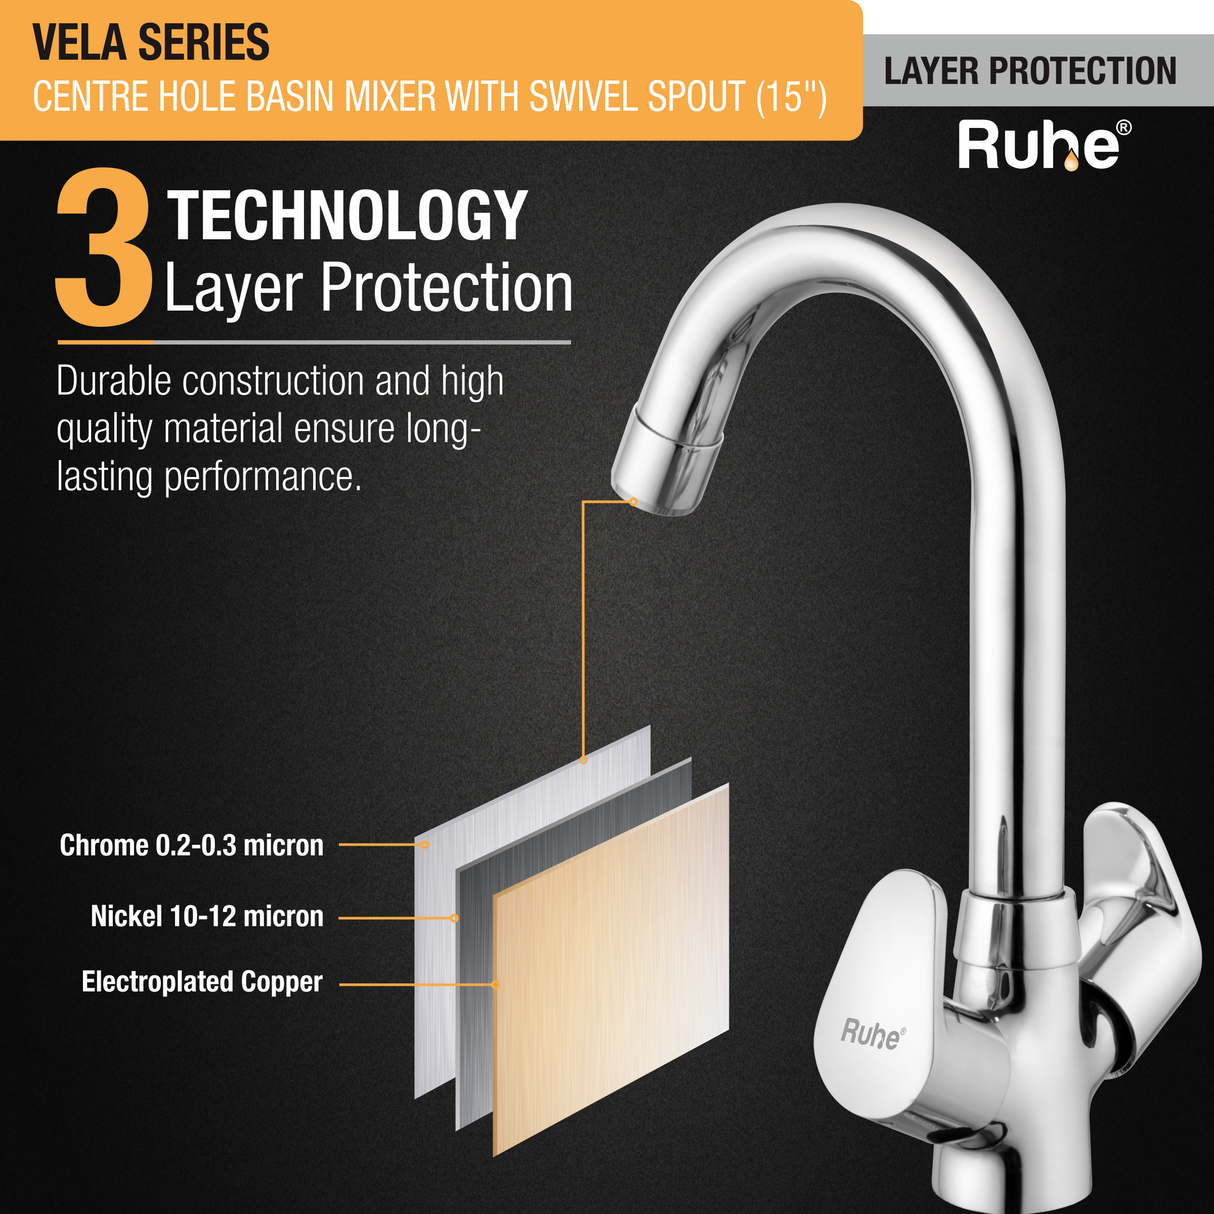 Vela Centre Hole Basin Mixer with Medium (15 inches) Round Swivel Spout Faucet protection